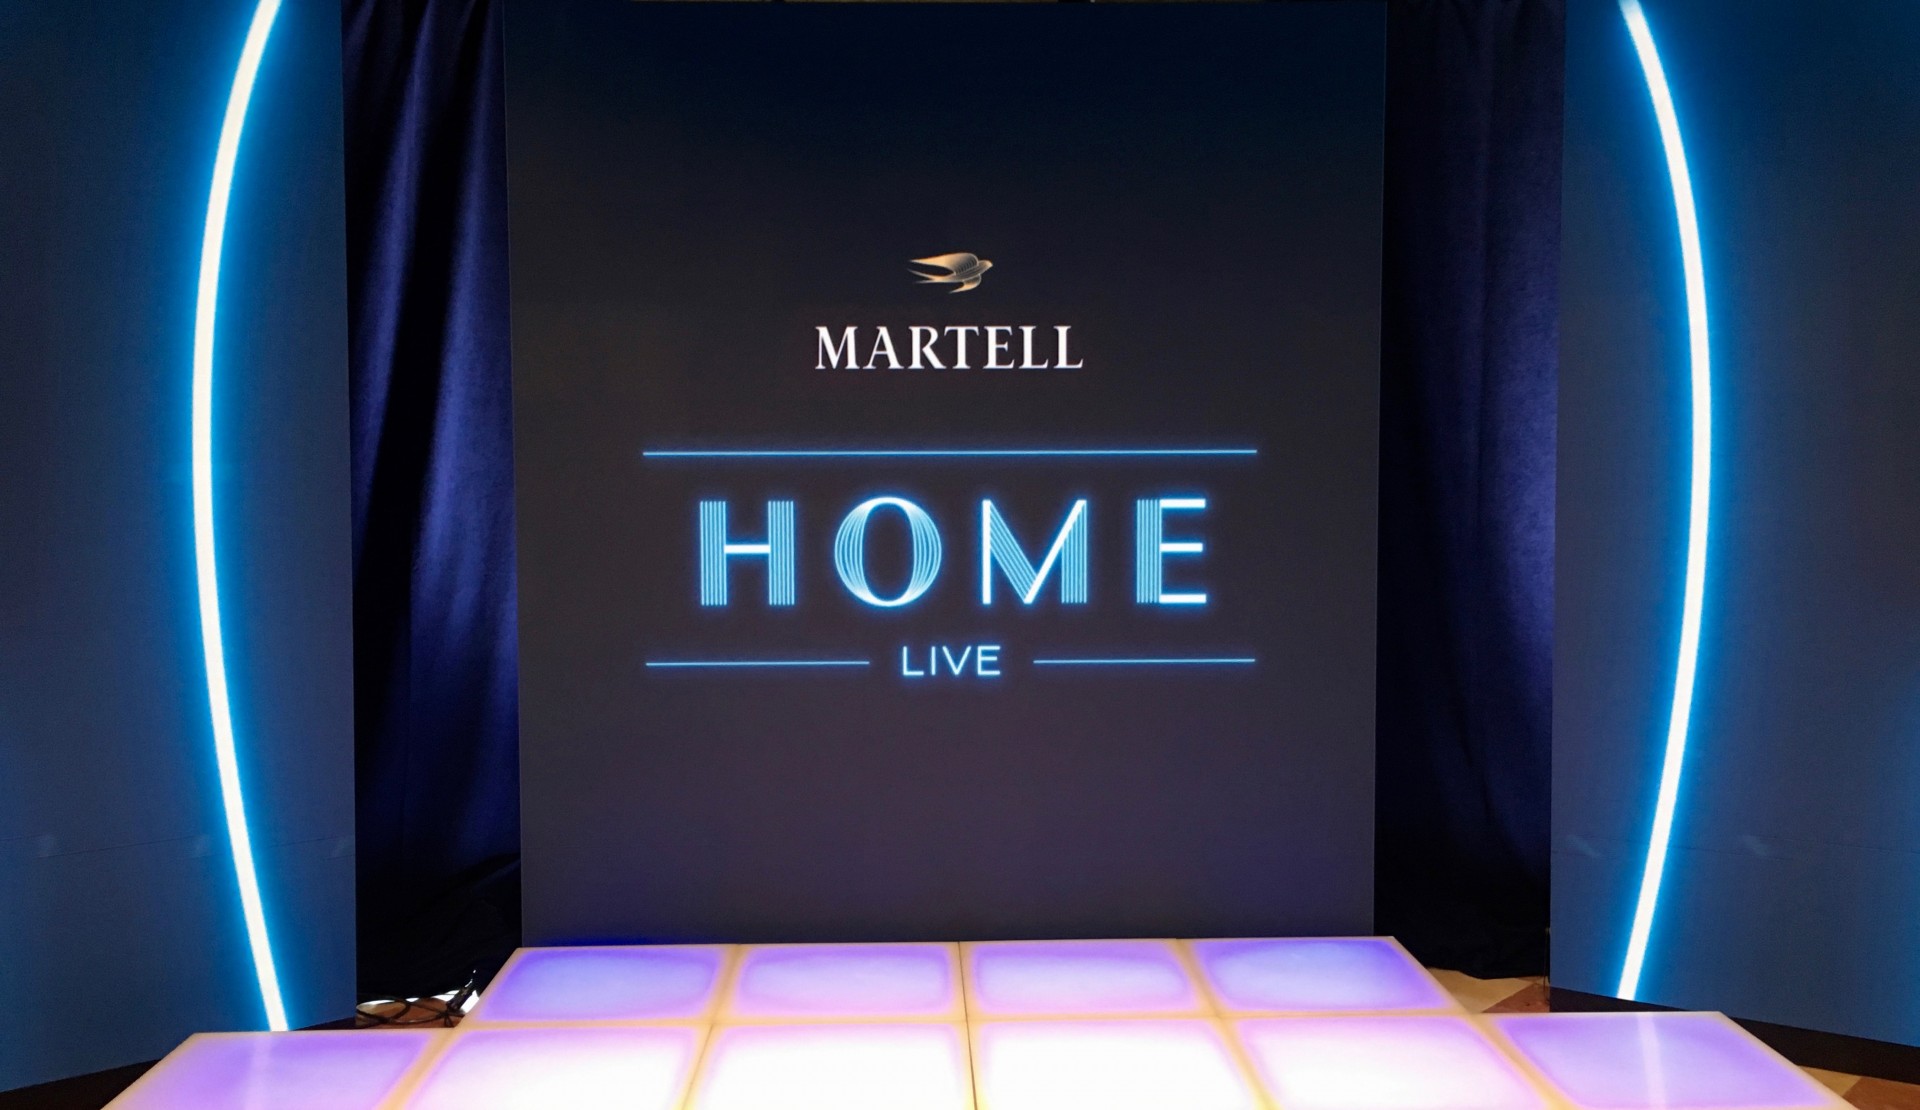 LED VIDEO WALL for the presentation of the brand Martell